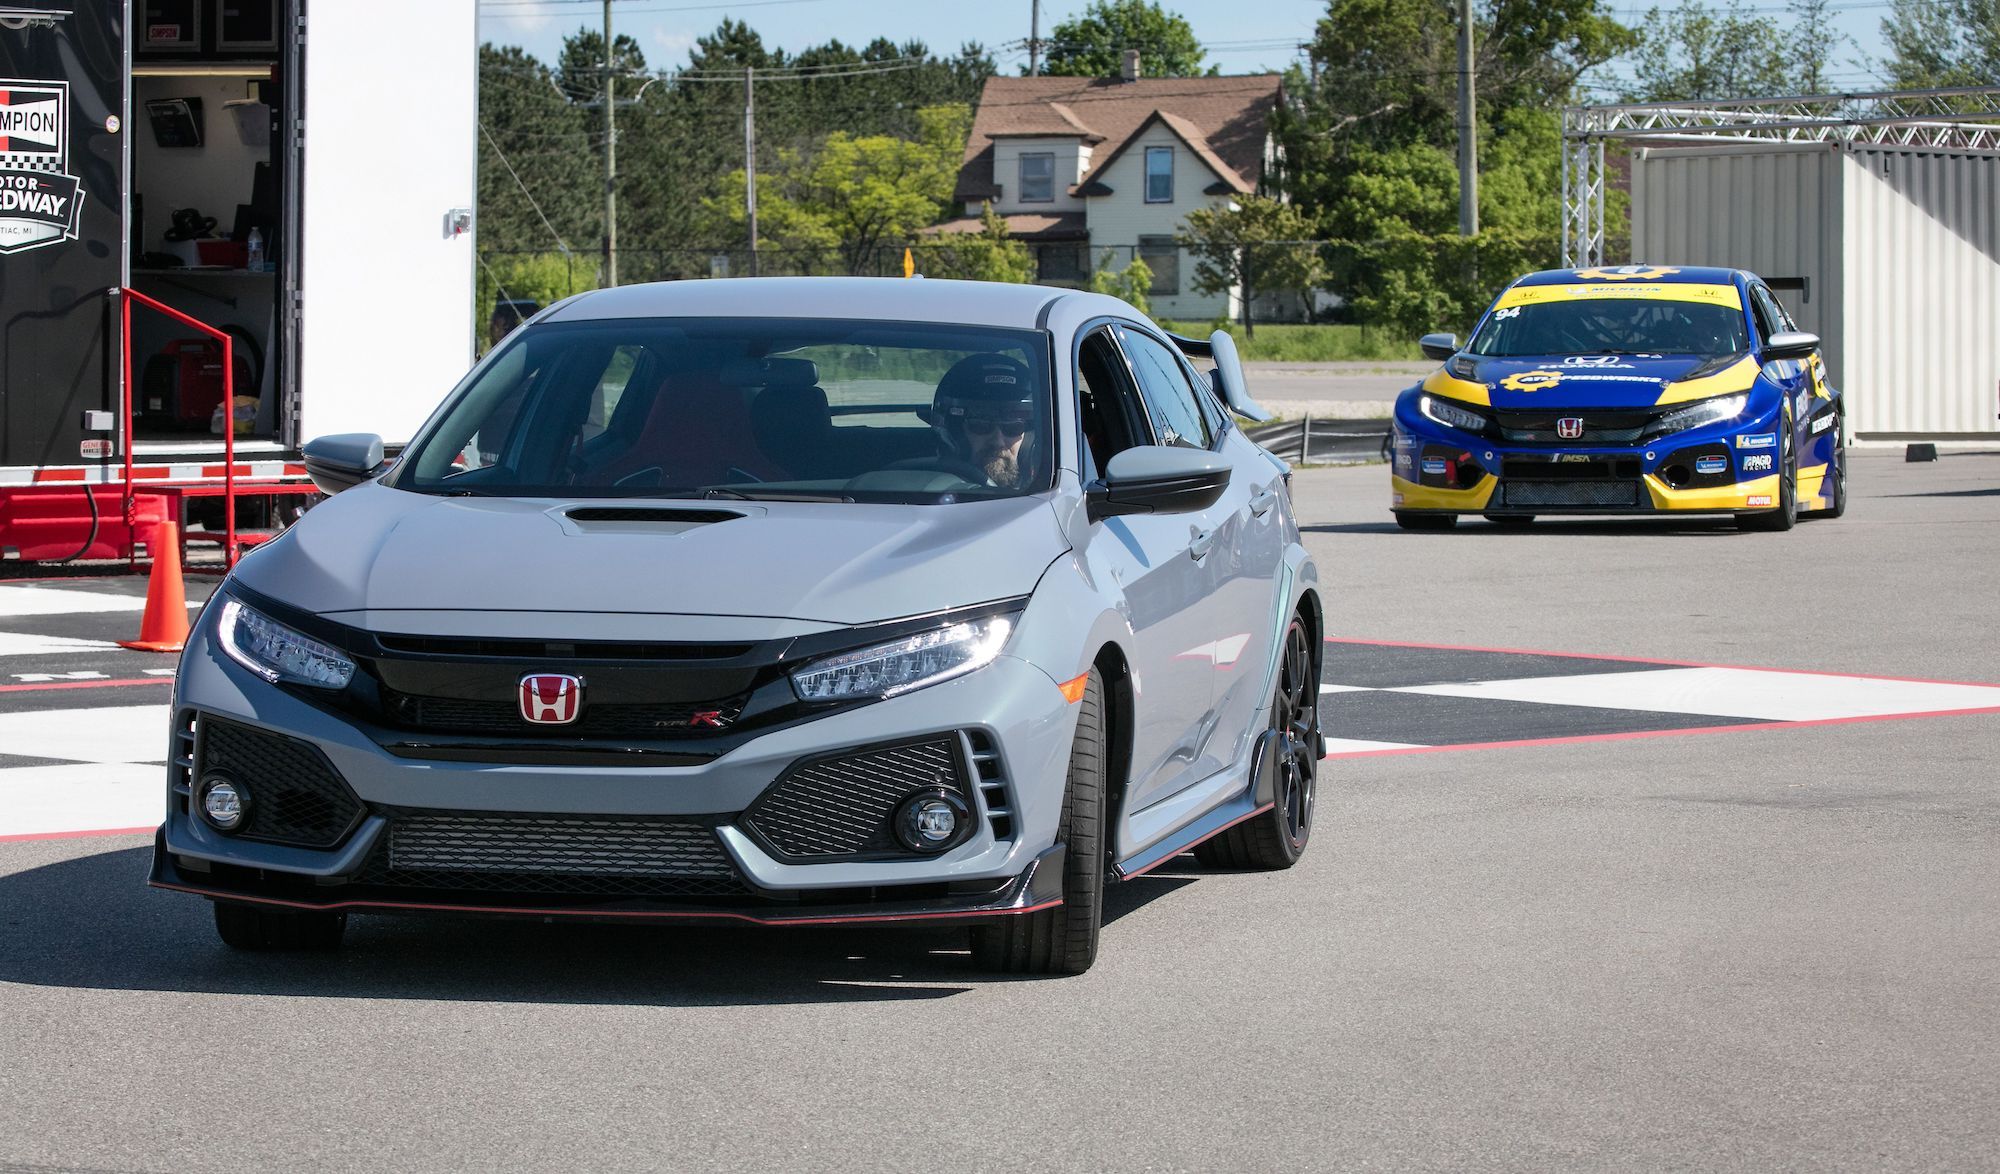 2019 Honda Civic Type R TCR race car. What it's like to drive.